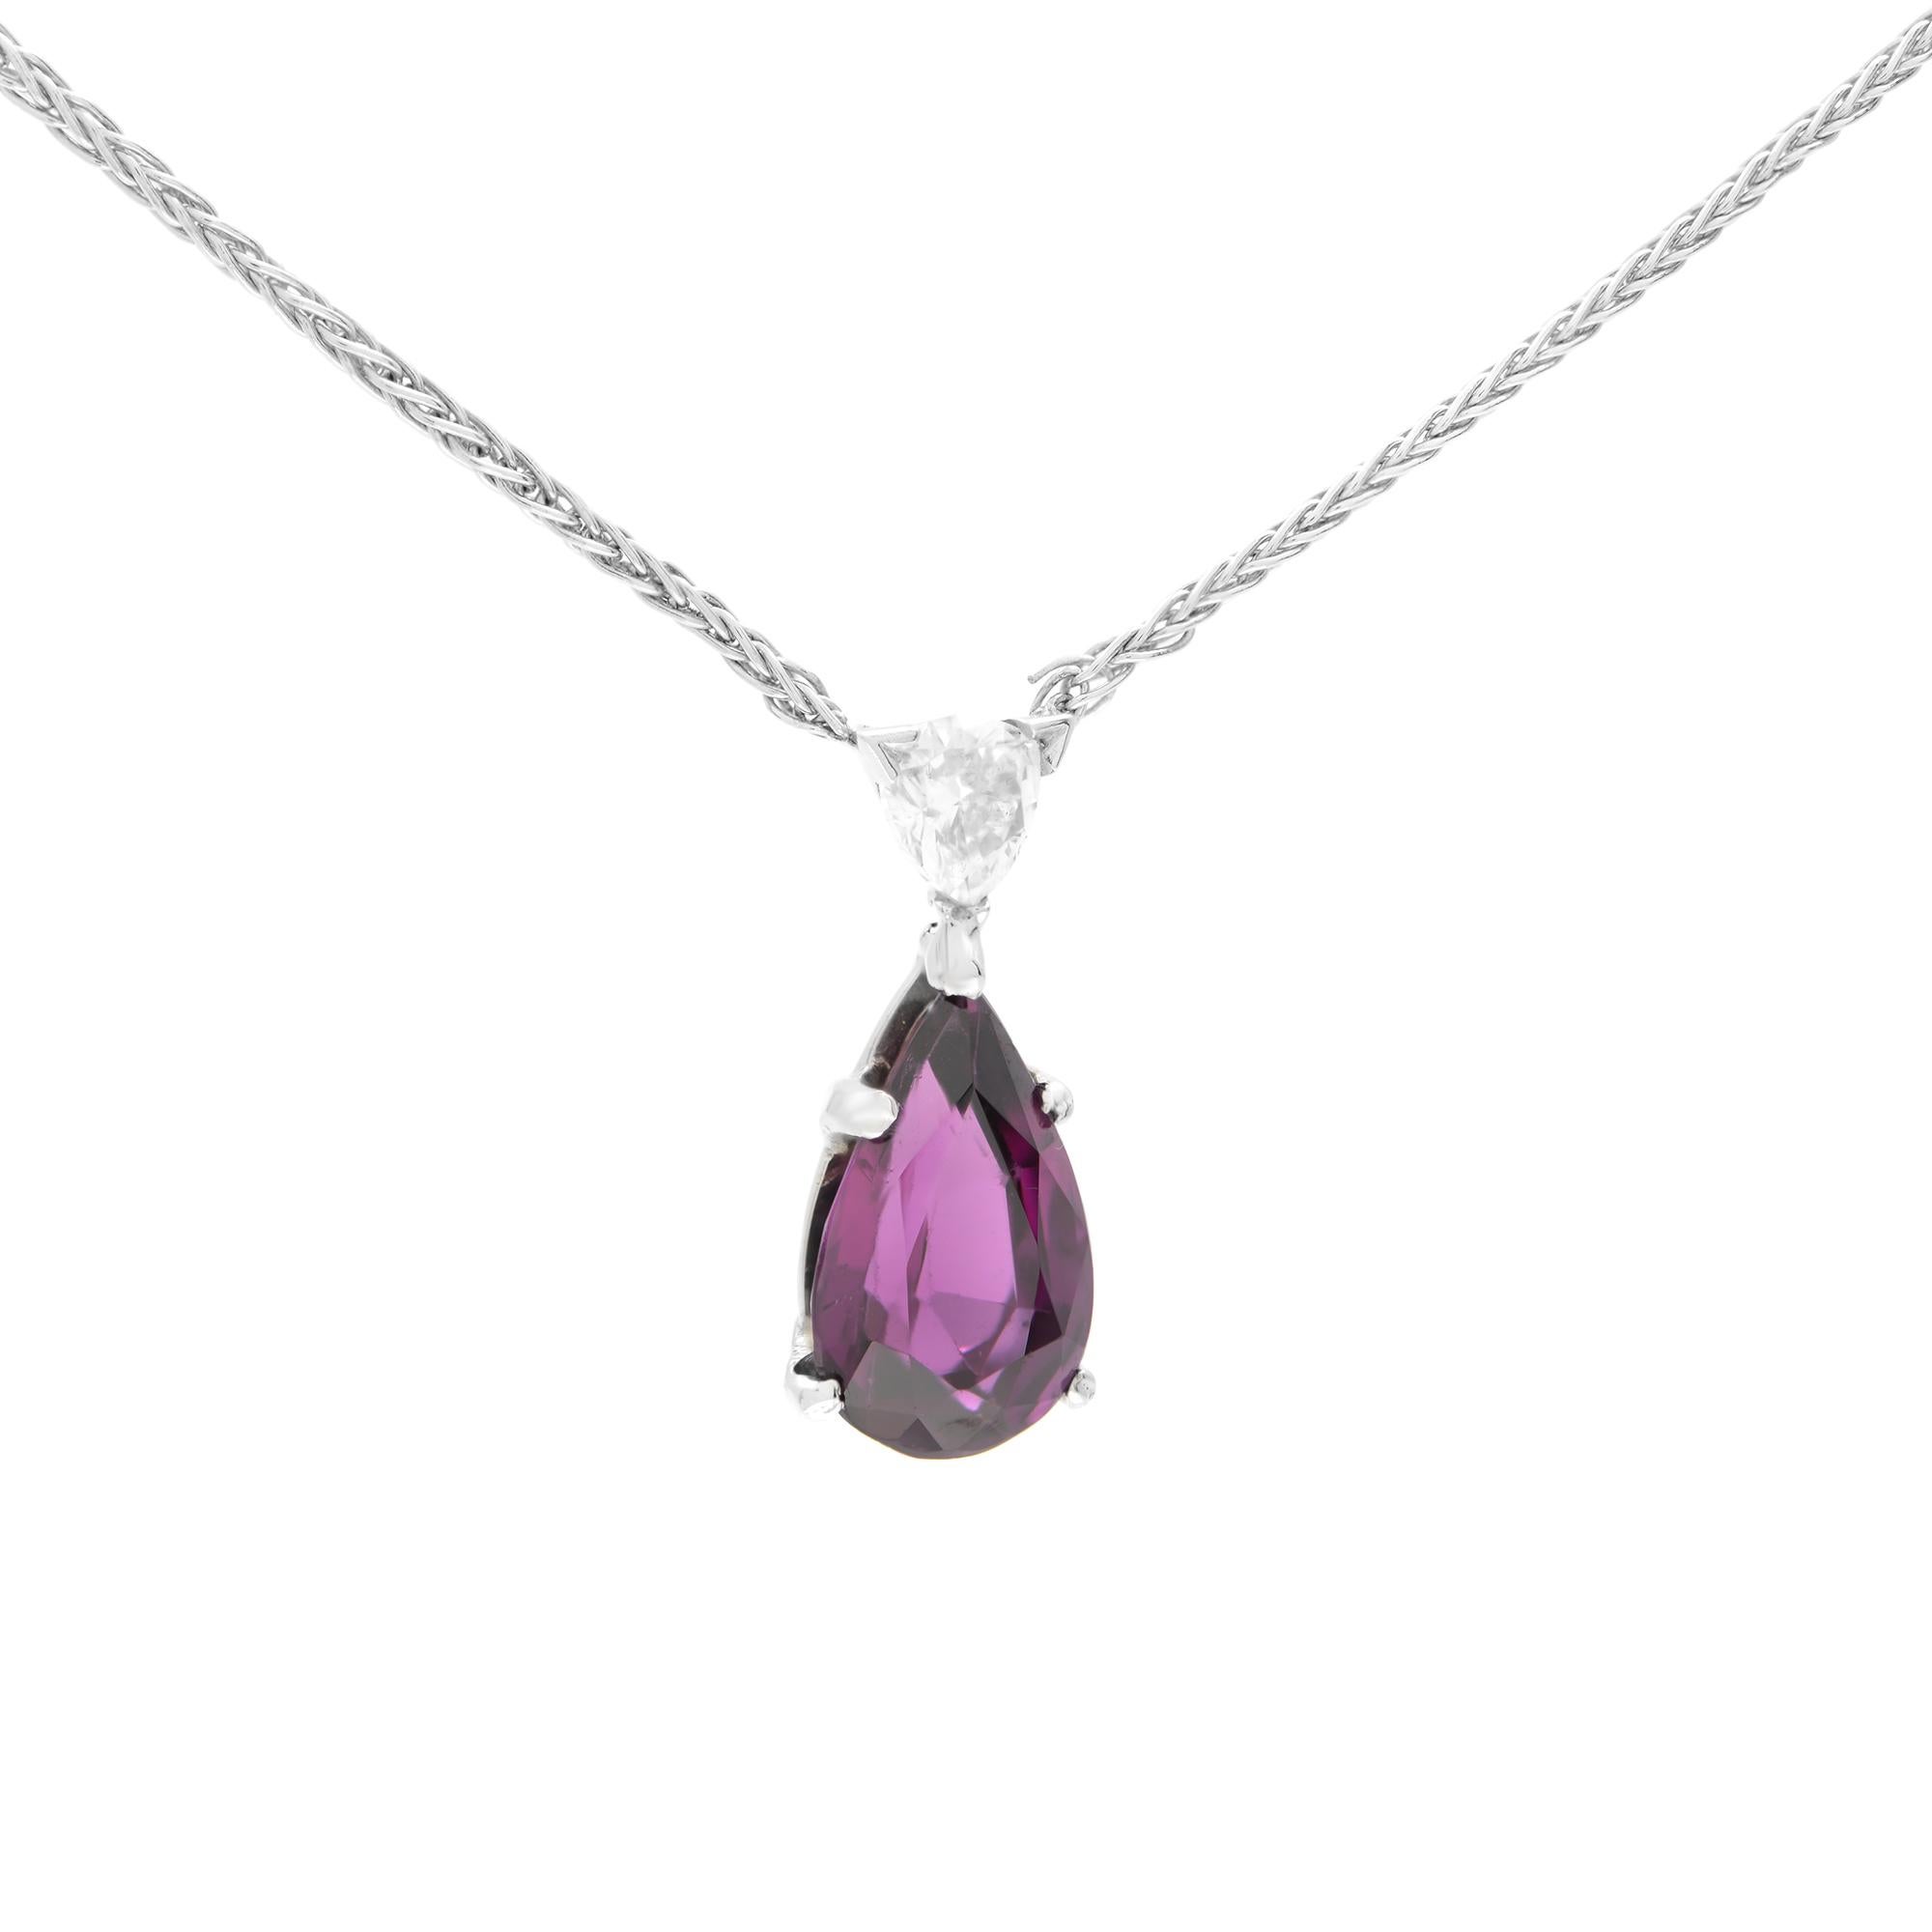 A pear-shaped purple Garnet is secured in a prong setting and embellished with a diamond accent on the top. Simple yet stunning, this teardrop garnet pendant with V bale is sculpted in 18k white gold. Pendant size: 20.00mm. Chain length: 18 inches.